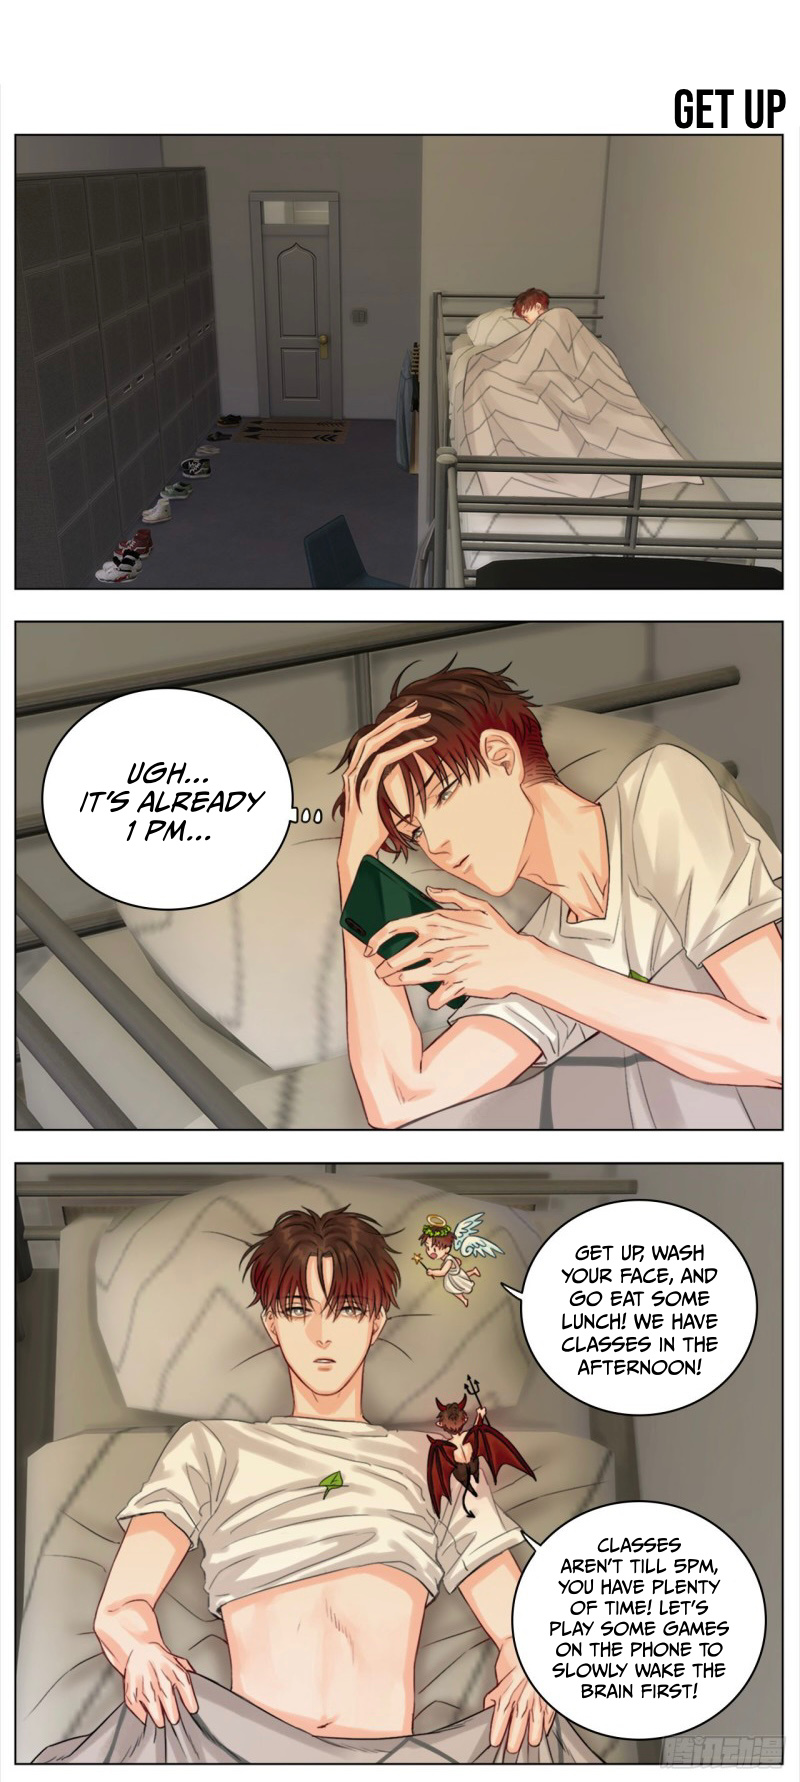 Boy's Dormitory 303 Chapter 12: Get Up - Picture 2